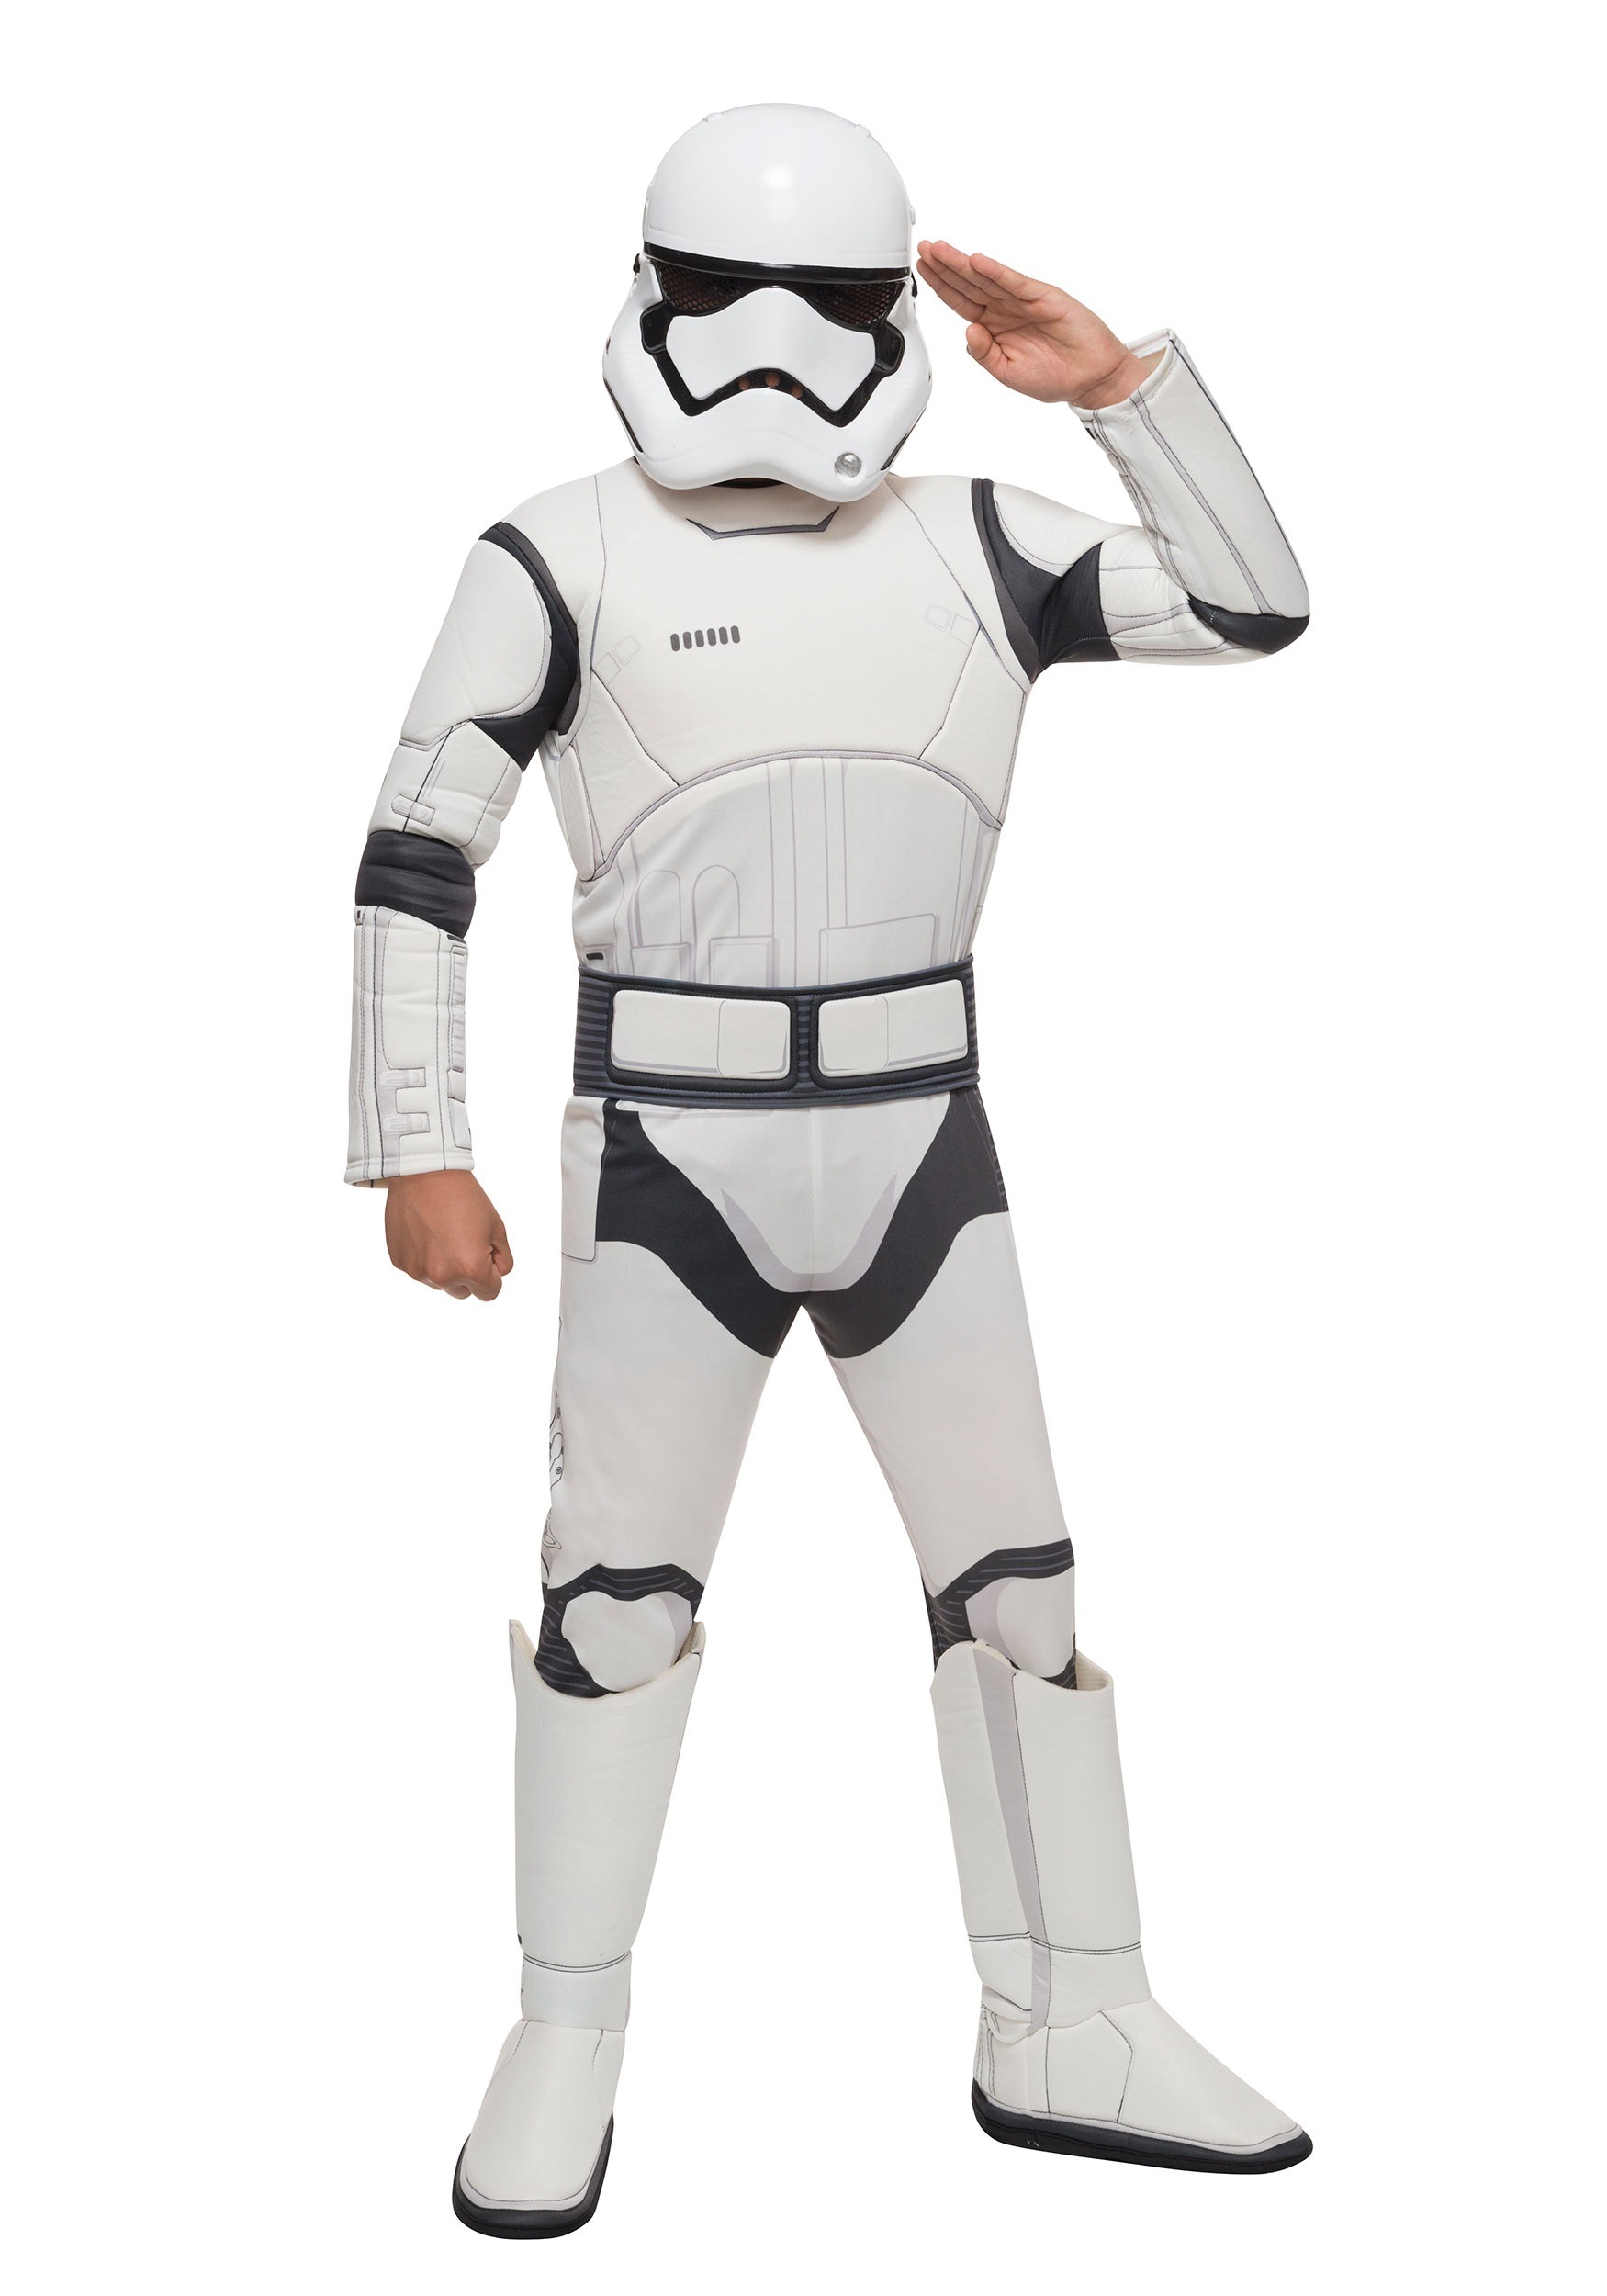 Star Wars The Force Awakens Deluxe Child Stormtrooper Disfrave Multicolor Colombia